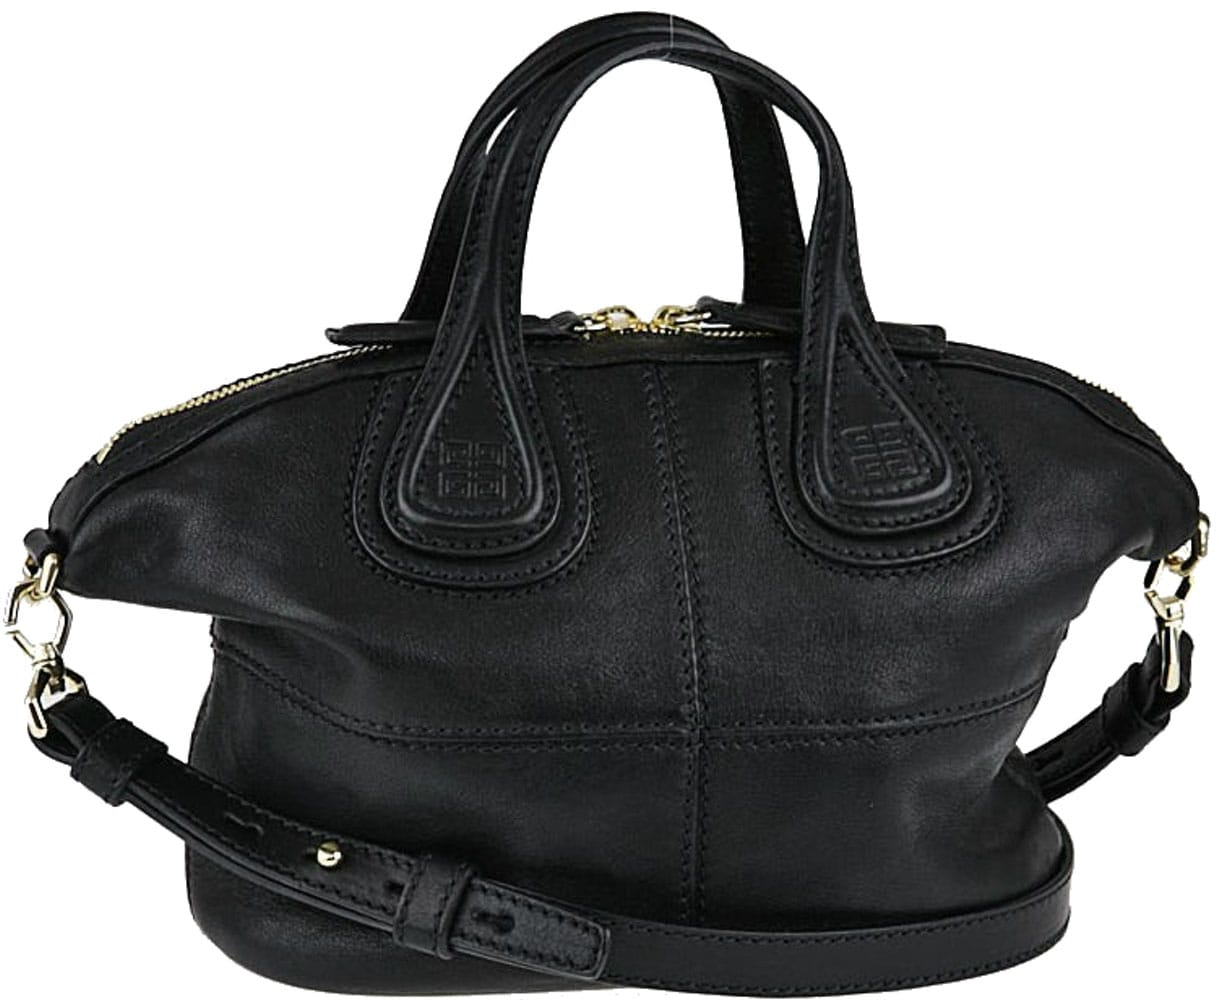 Givenchy Nightingale is a hobo-style bag with double top handles, double top zips, and a detachable shoulder strap